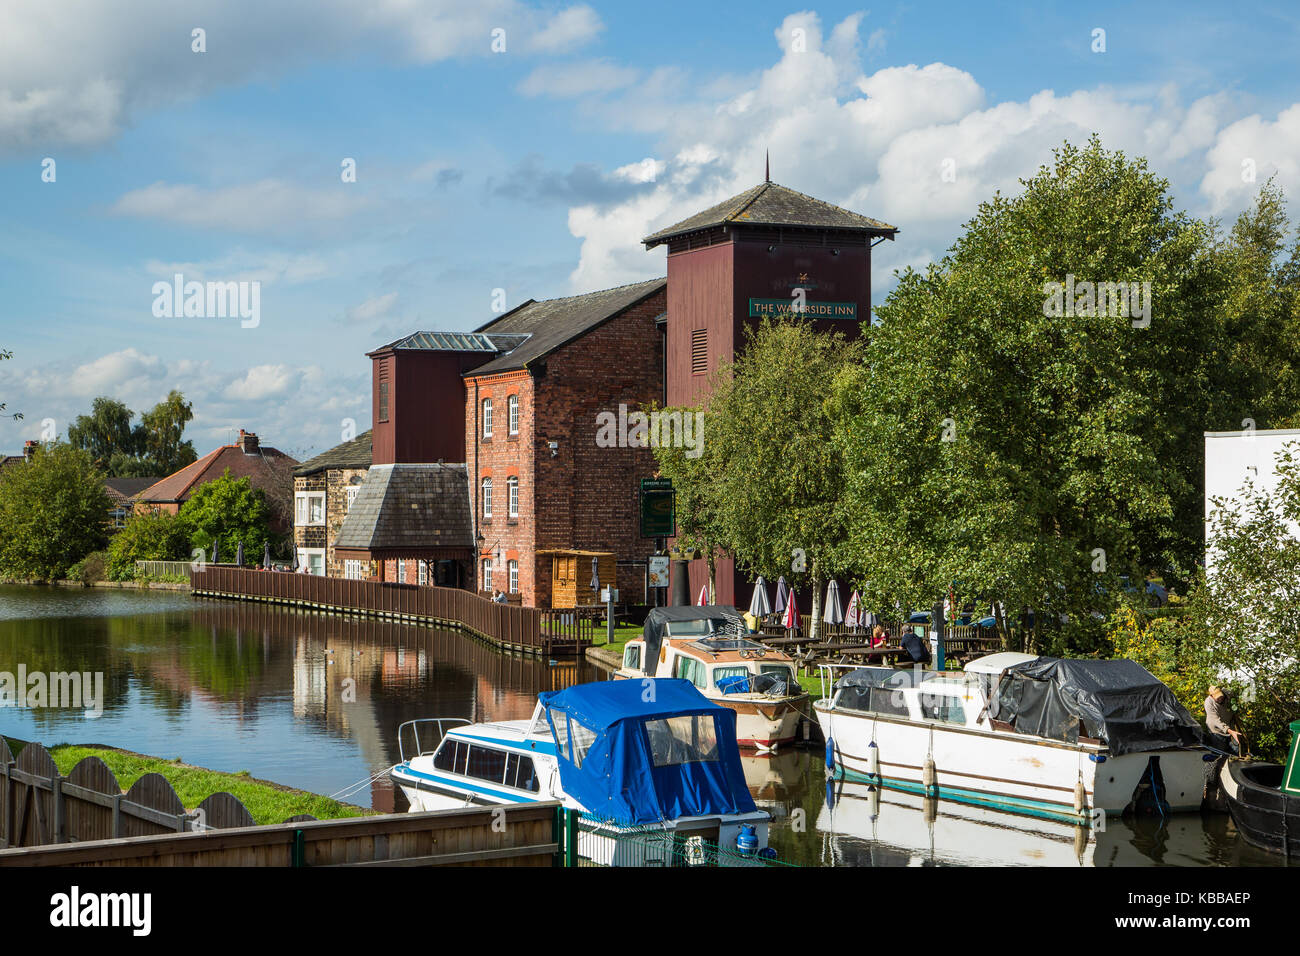 The Waterside Inn In Leigh, England, UK Stock Photo